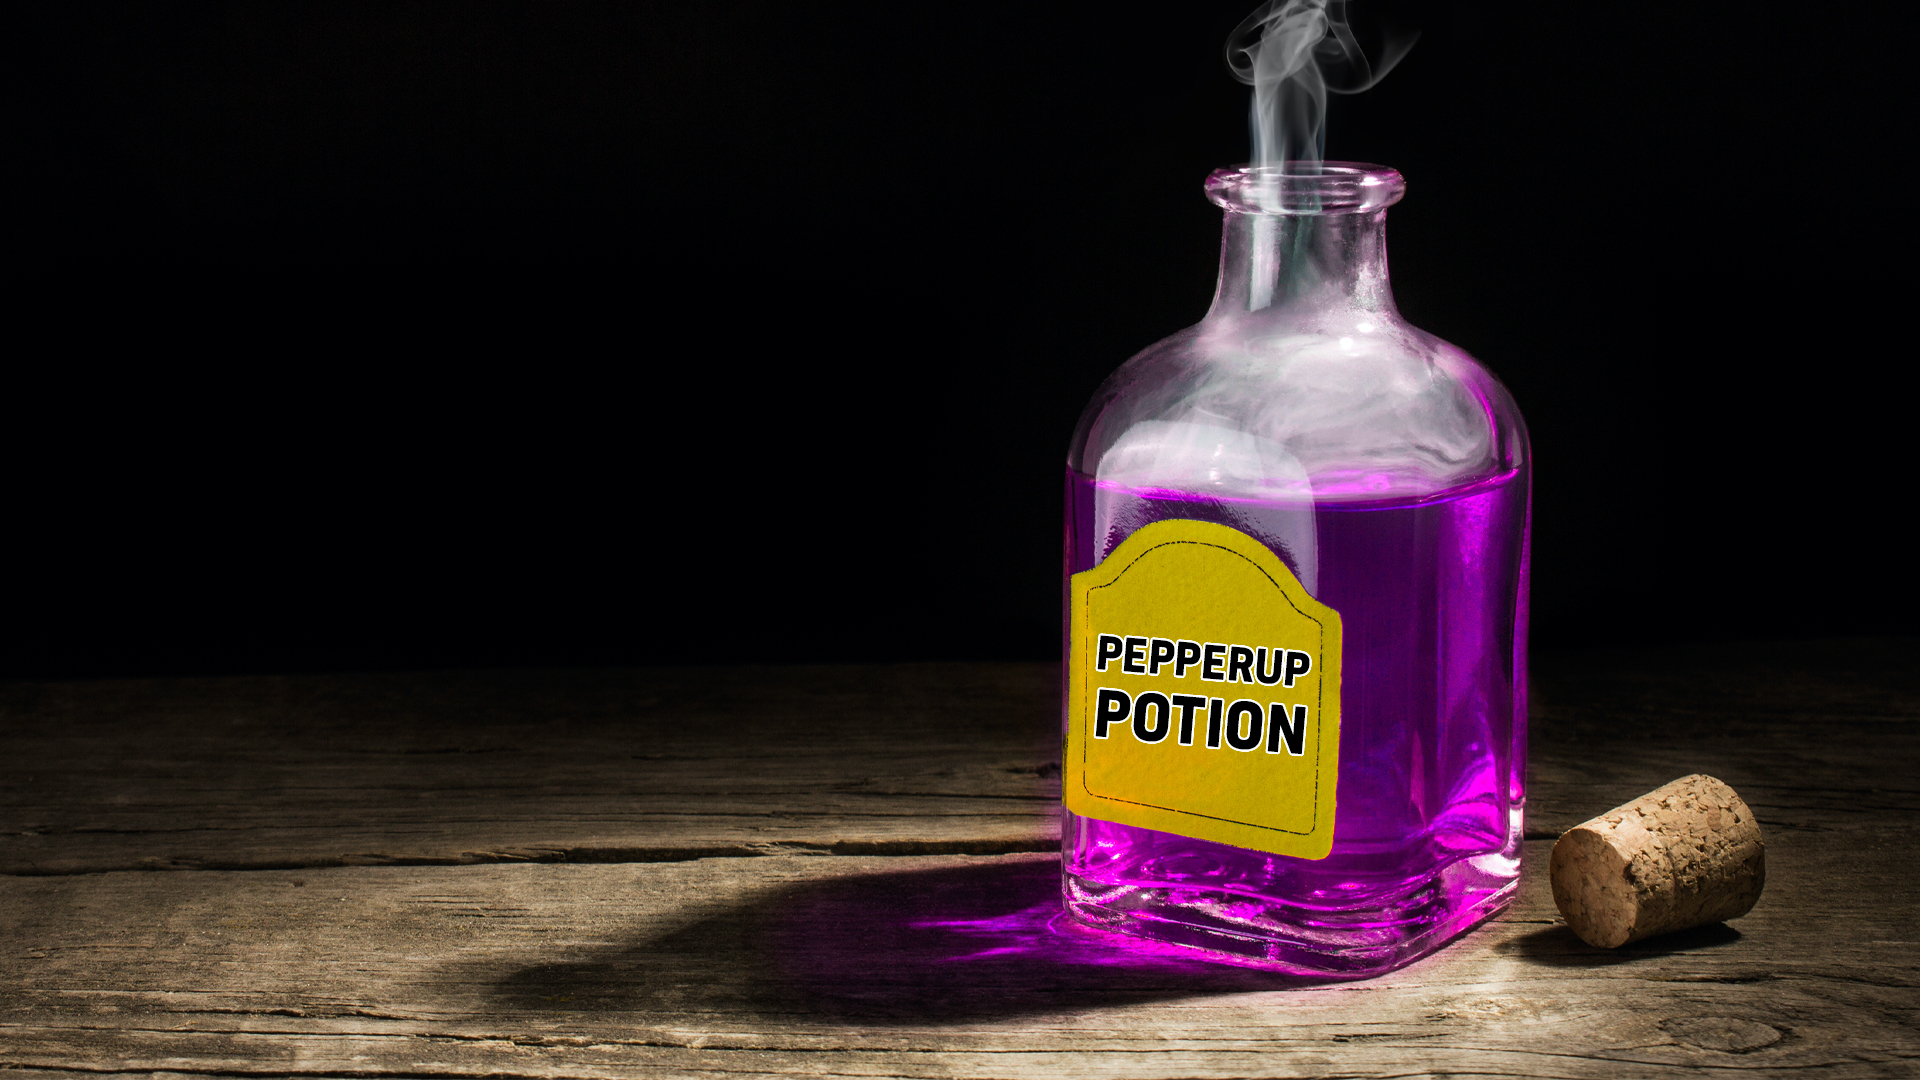 Pepperup Potion